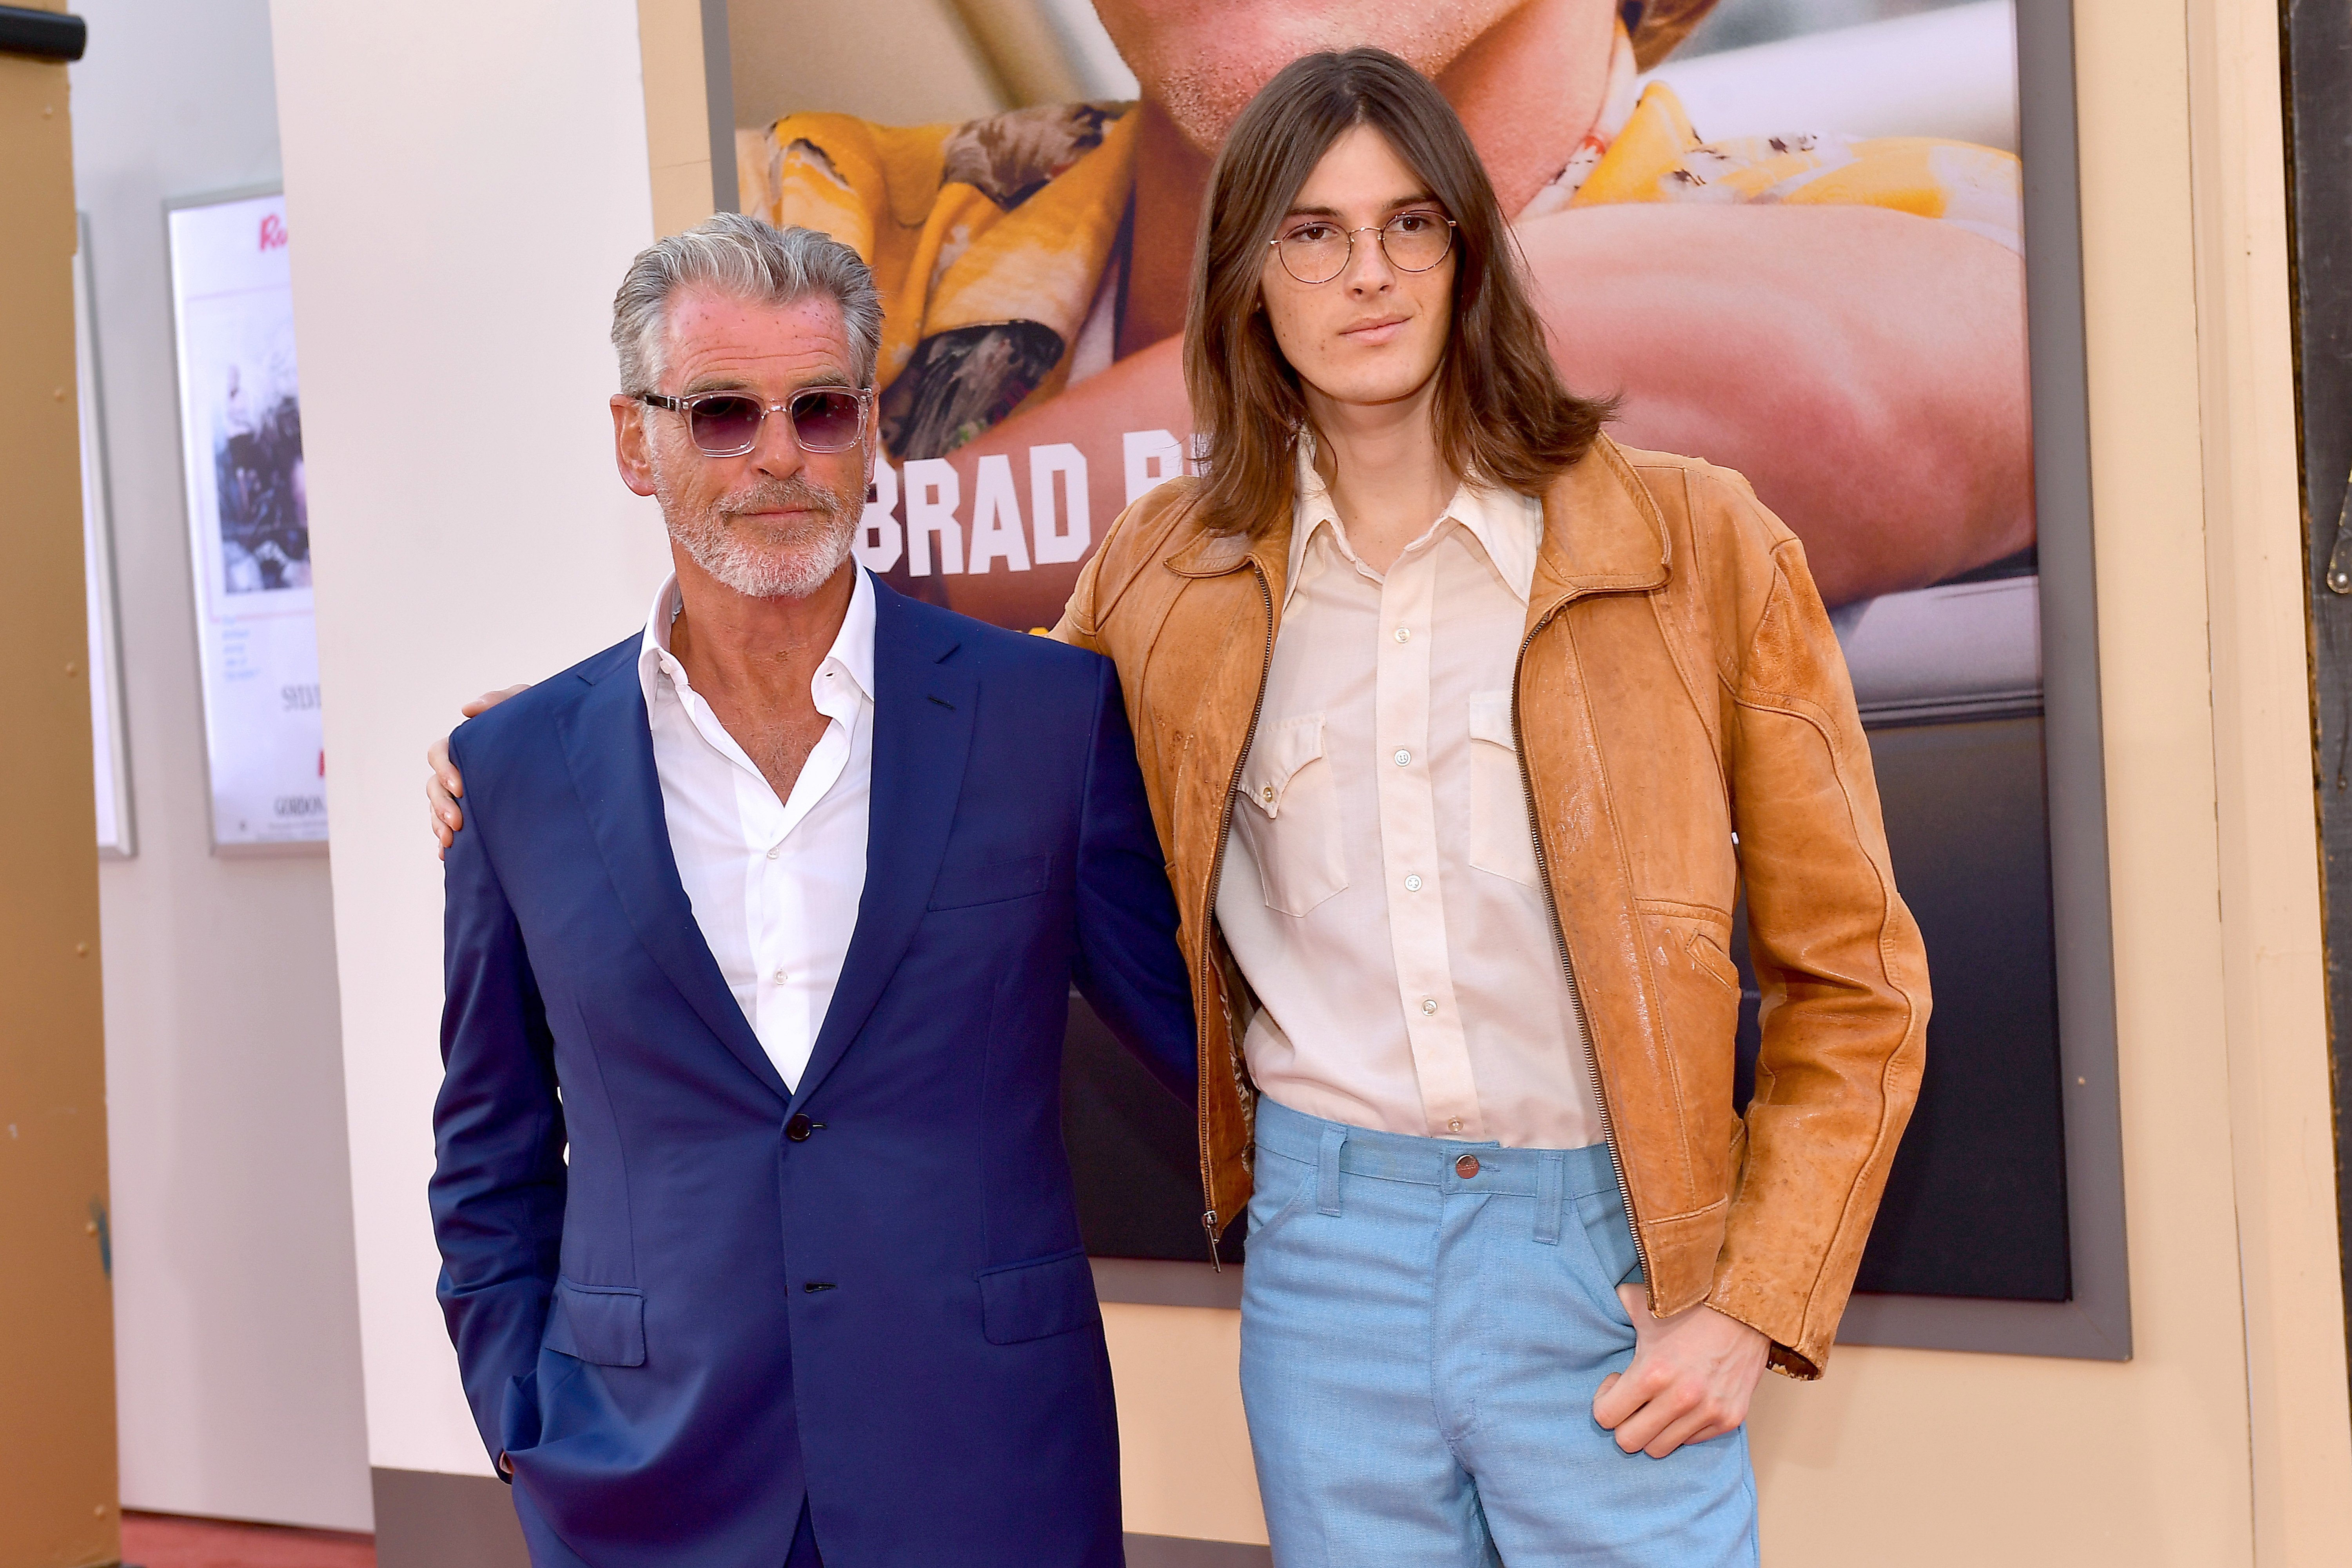 Pierce Brosnan and Dylan Brosnan attends Sony Pictures' "Once Upon A Time...In Hollywood" Los Angeles Premiere on July 22, 2019, in Hollywood, California. | Source: Getty Images.